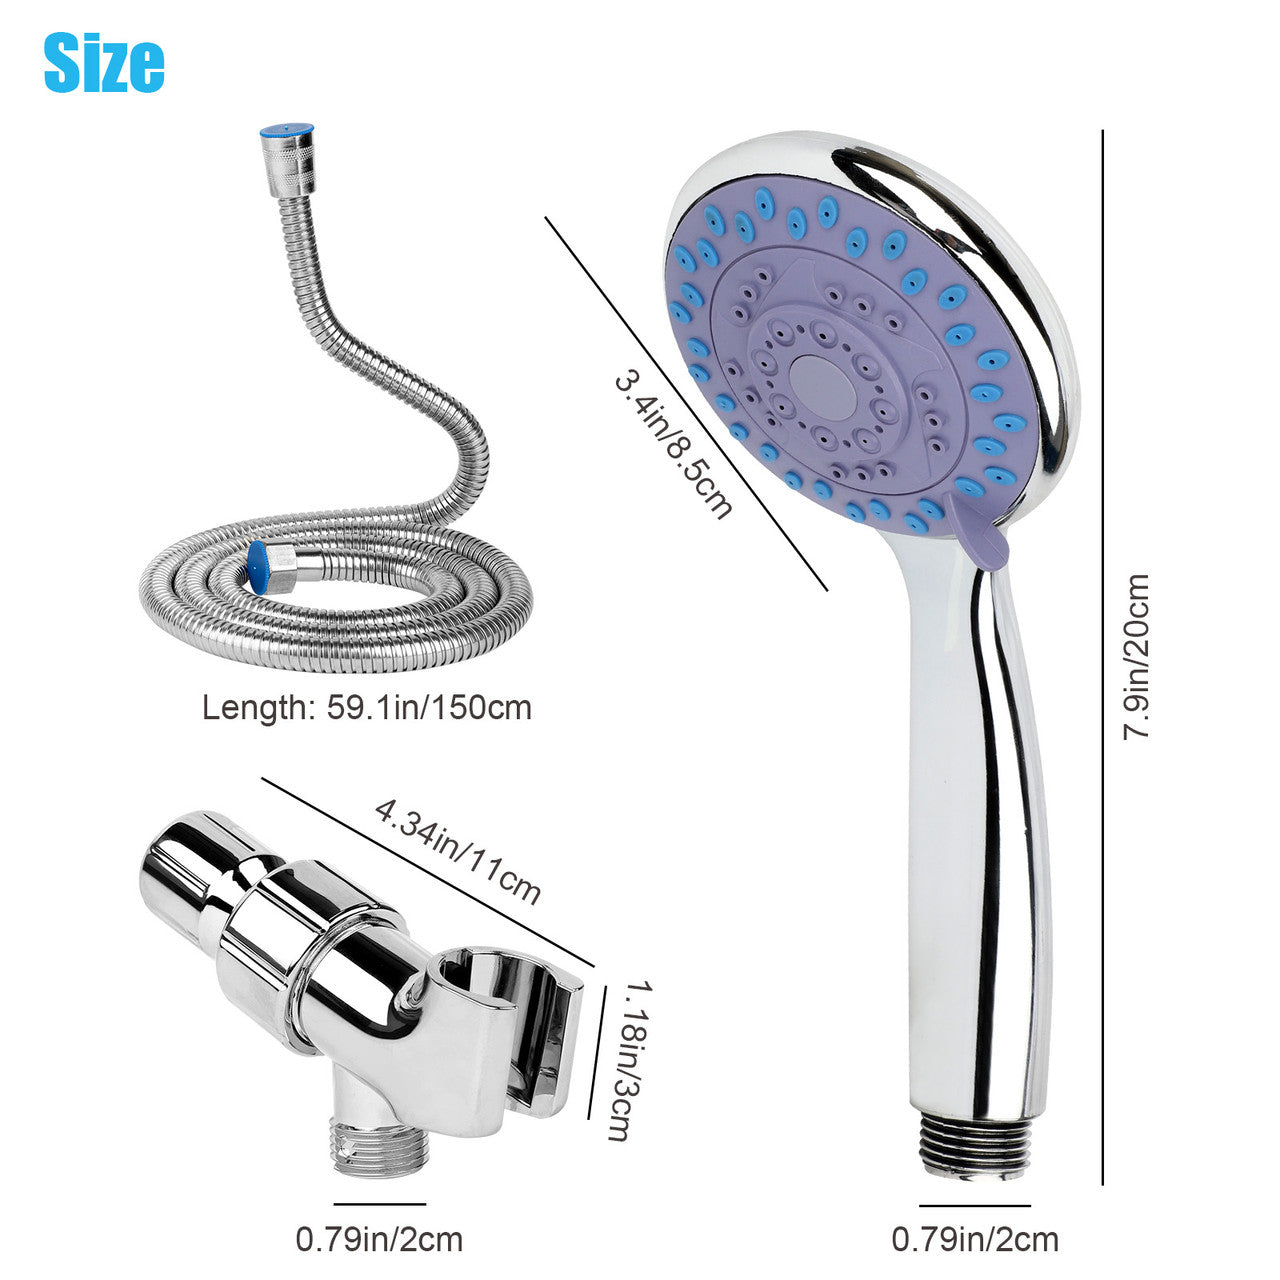 Five Speed Booster Shower Head with 59” Hose - Solid Brass Adjustable Swivel and Stainless Steel 59 Inch Hose, Durable and Long Life, No Rust, No Leaks, 5 Spray Modes, 360 Degree Rotation (Stainless Steel)